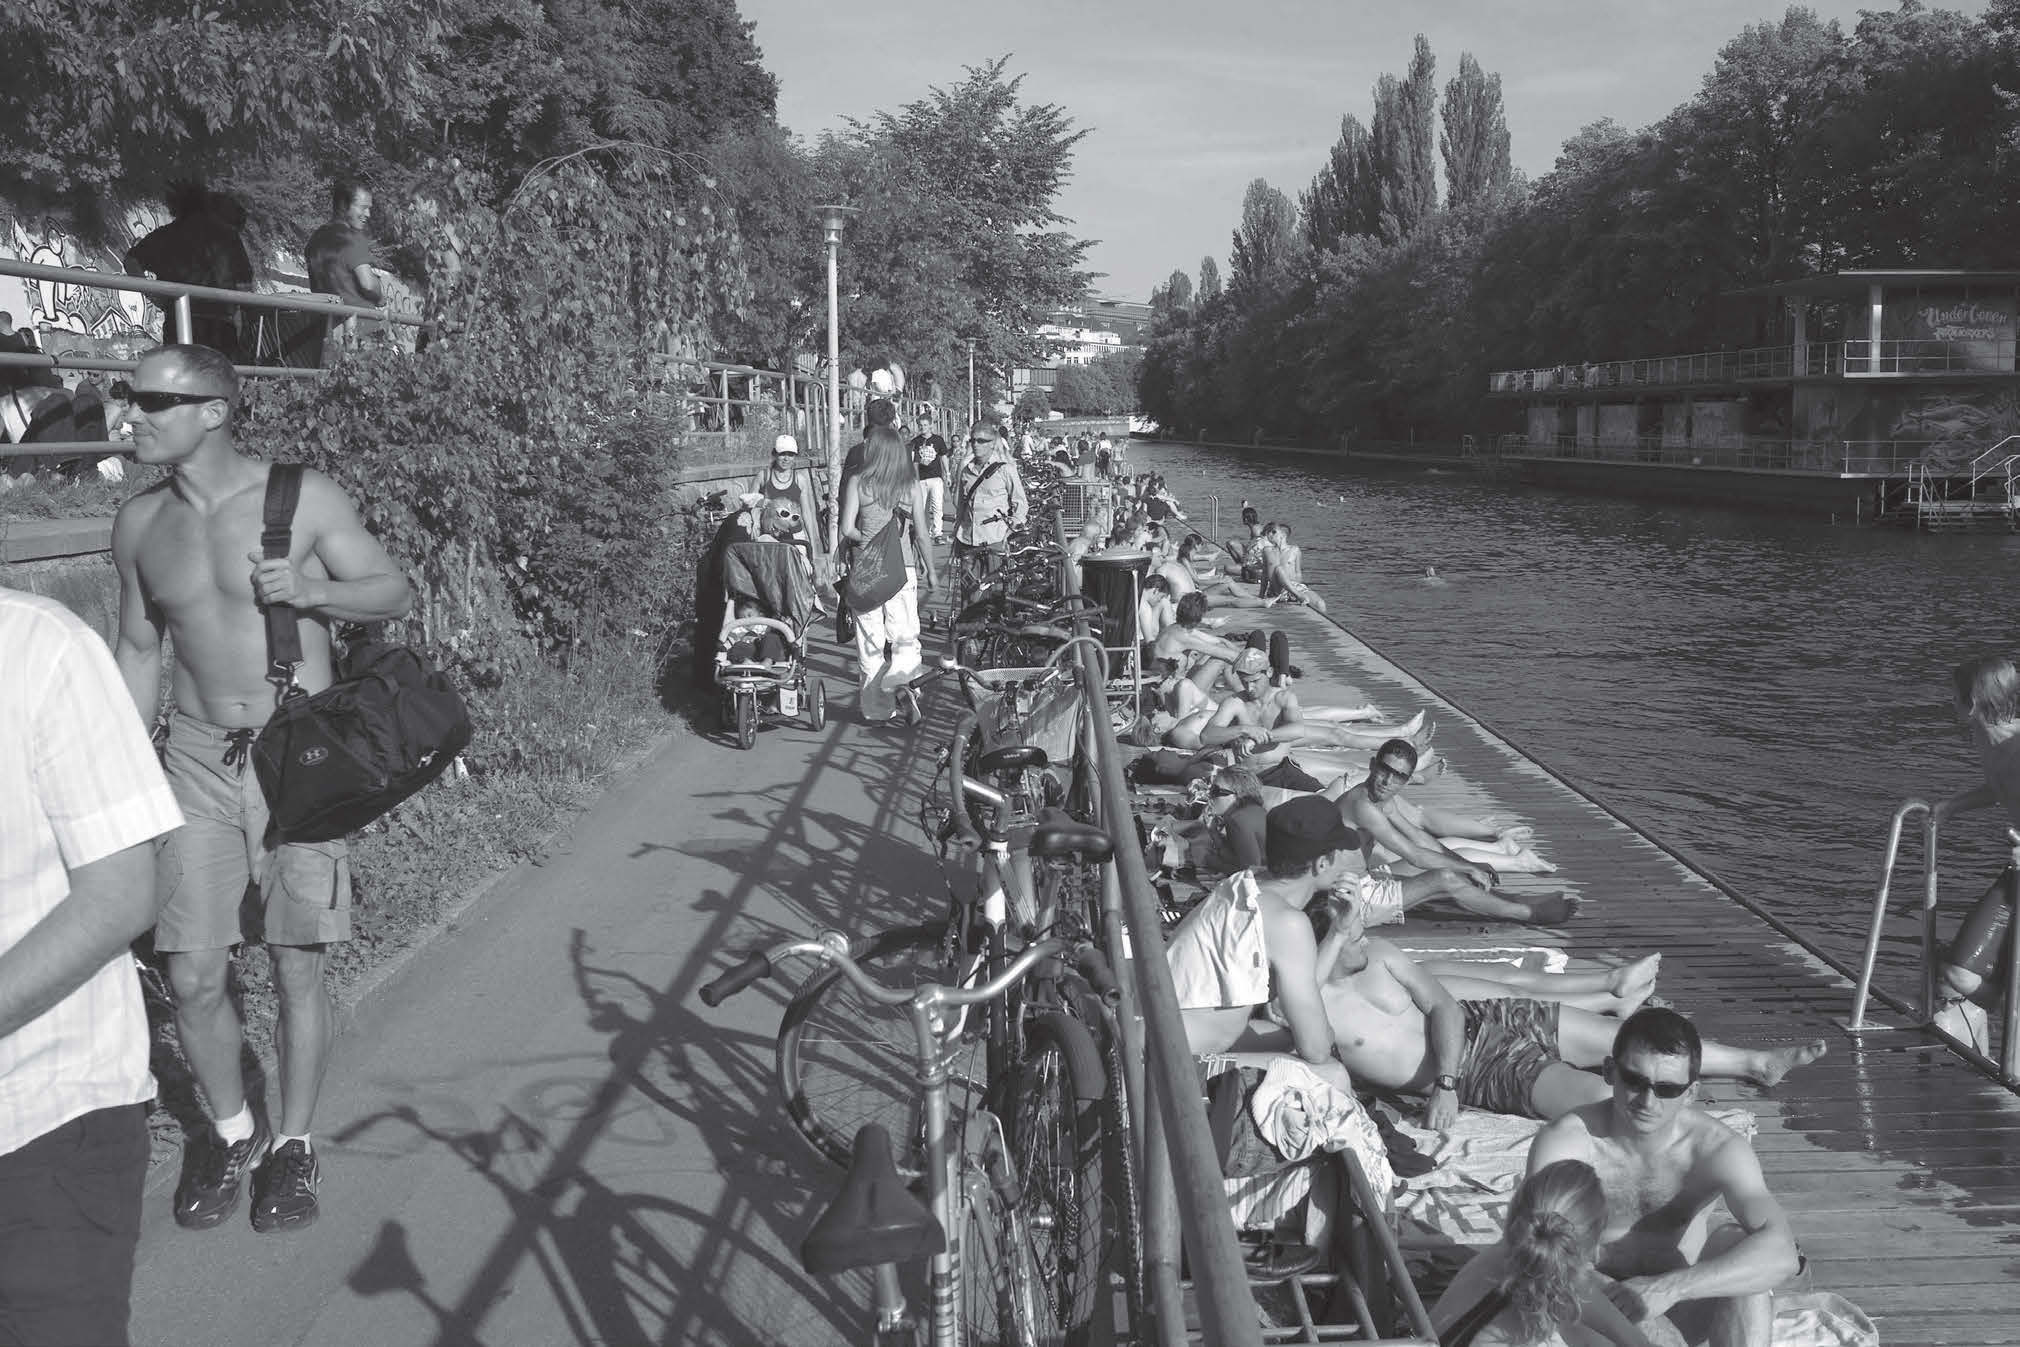 Crowd scene on the Oberer Letten of the Limmat Canal in Zurich